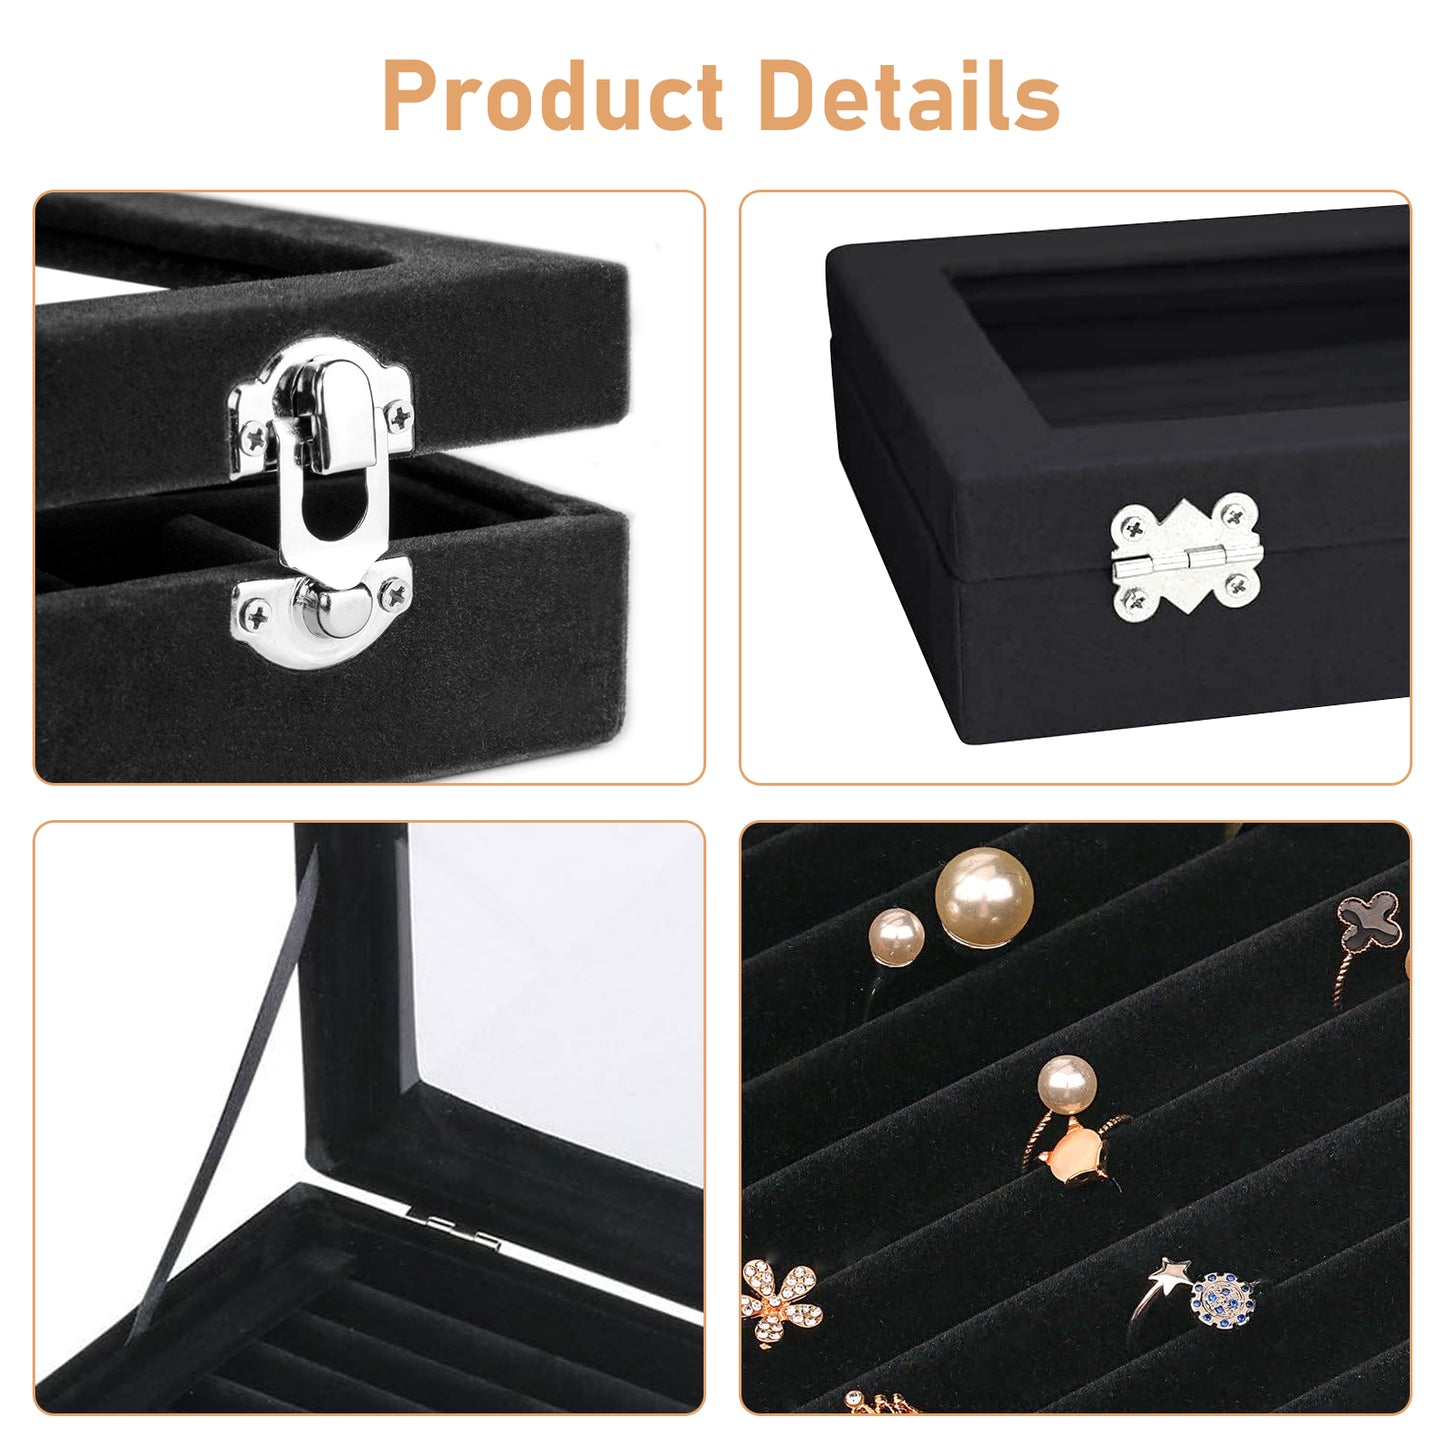 7 Slots Velvet Jewelry Display Storage Box - Storage Tray with Modern Buckle Closure,Glass Ring jewelry Display Case Earring Organizer Jewelry Box,Gift for Women(Black)